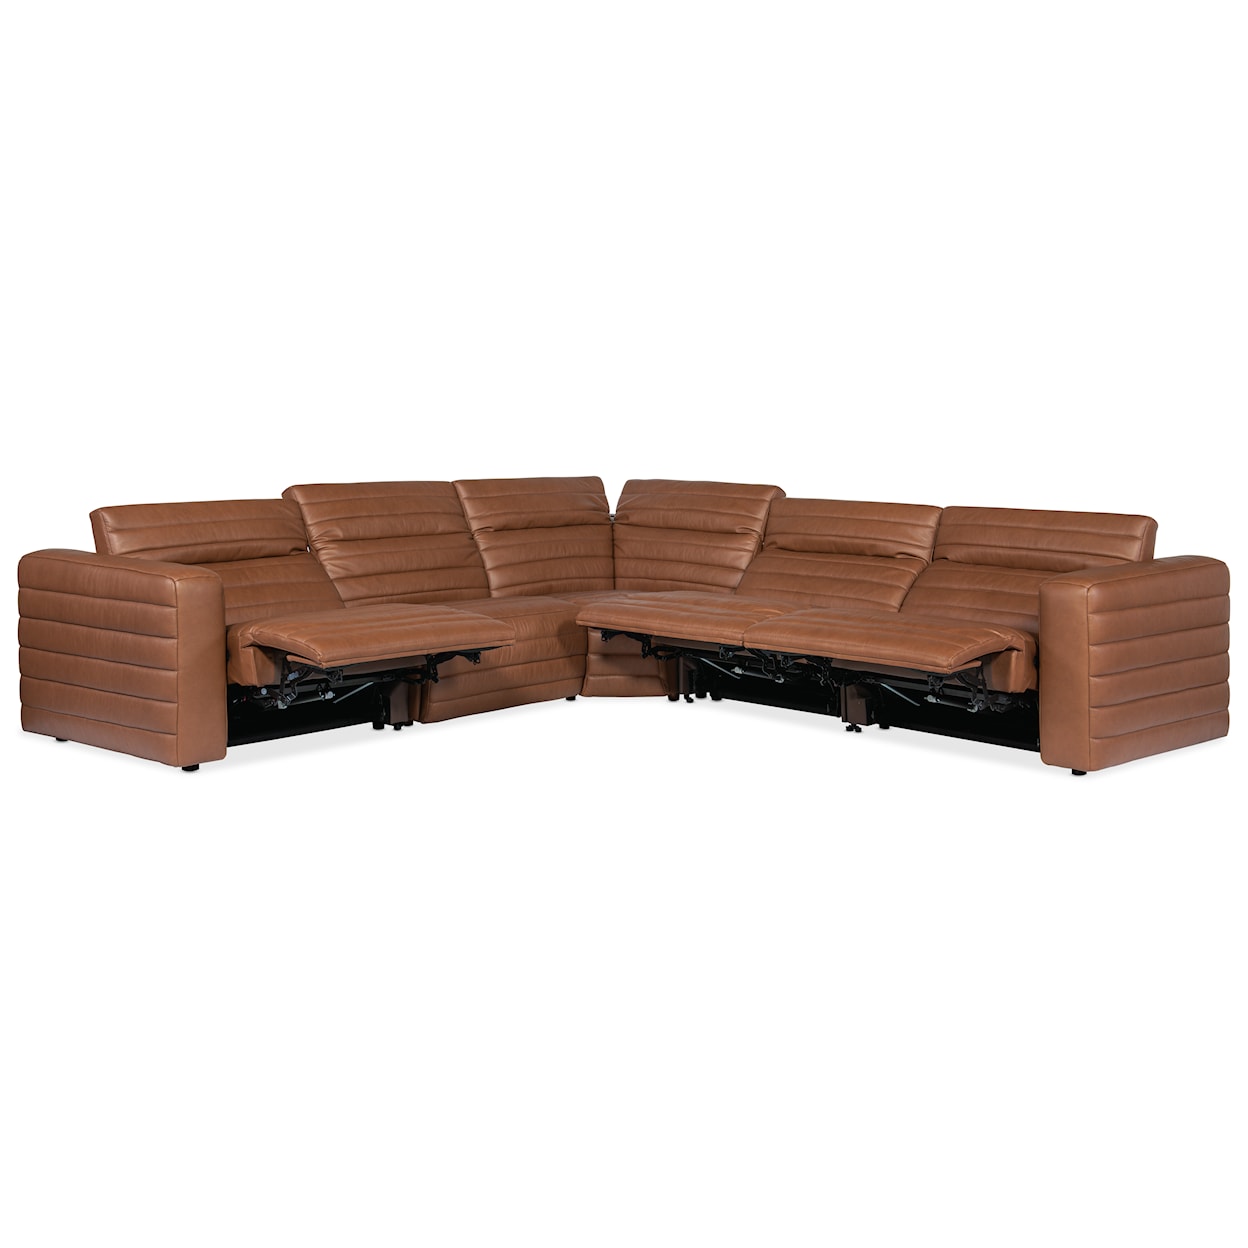 Hooker Furniture Chatelain 5 Pc Power Recline Sectional w/ Pwr Headrest